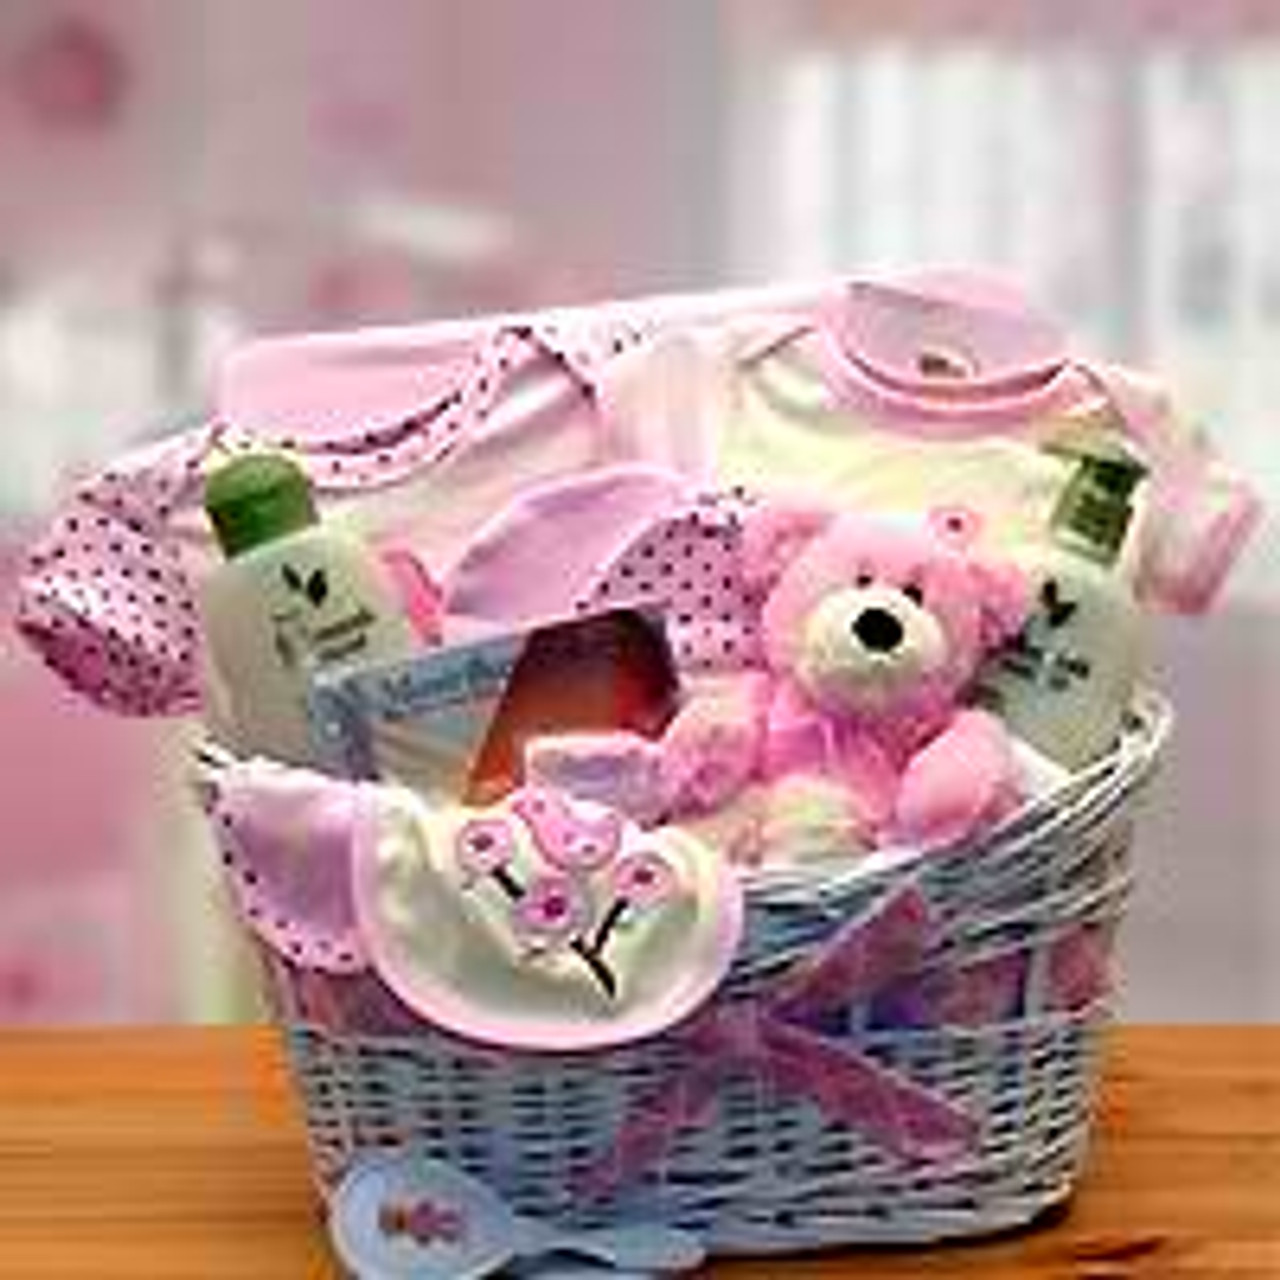 new baby gift basket delivery